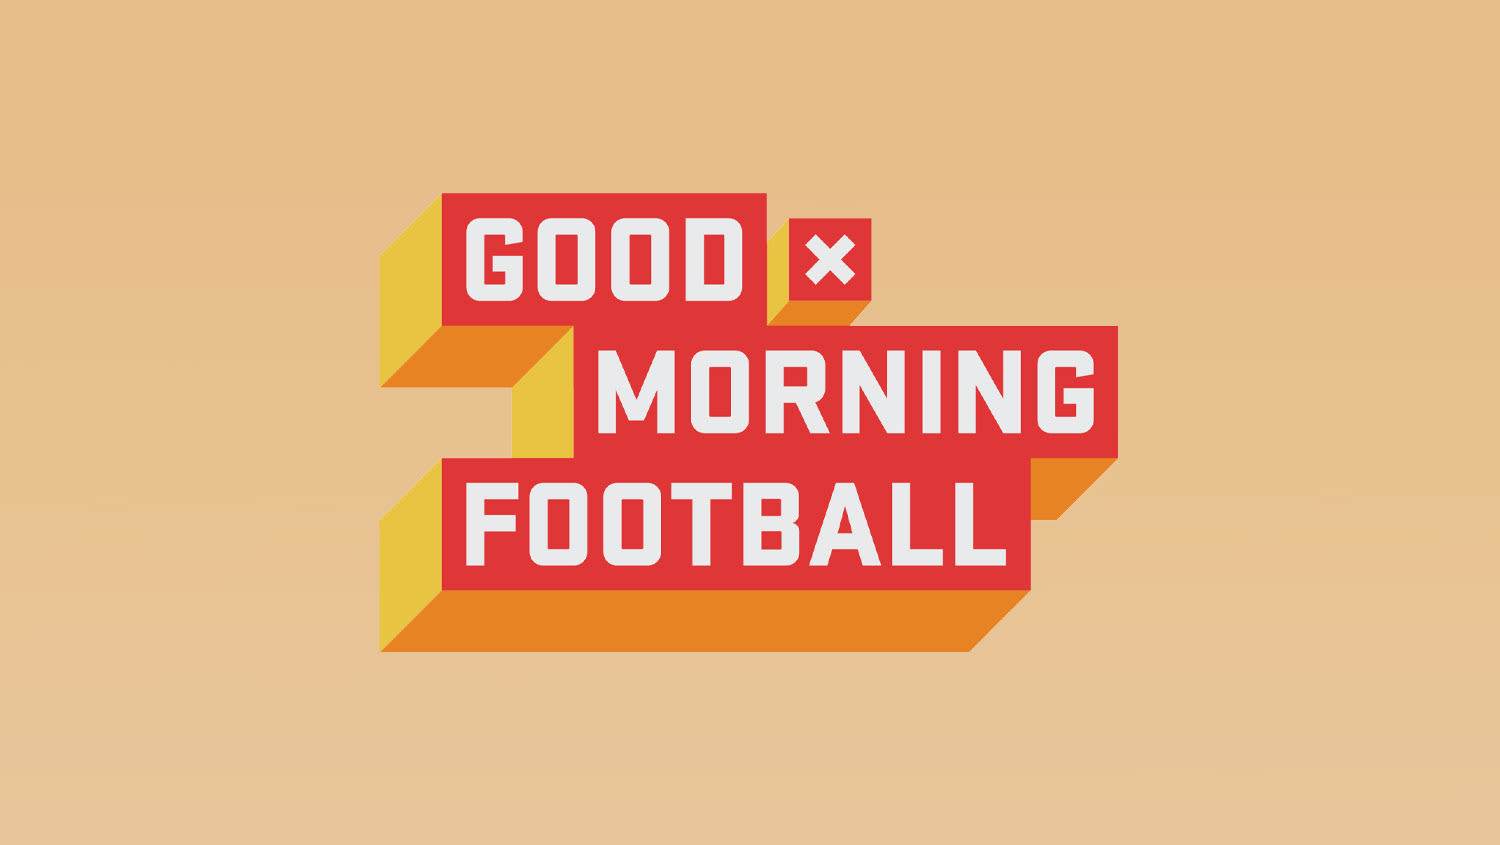 ‘Good Morning Football’ Returns For A Day To Announce NFL’s International Games Schedule Amid Move To L.A.